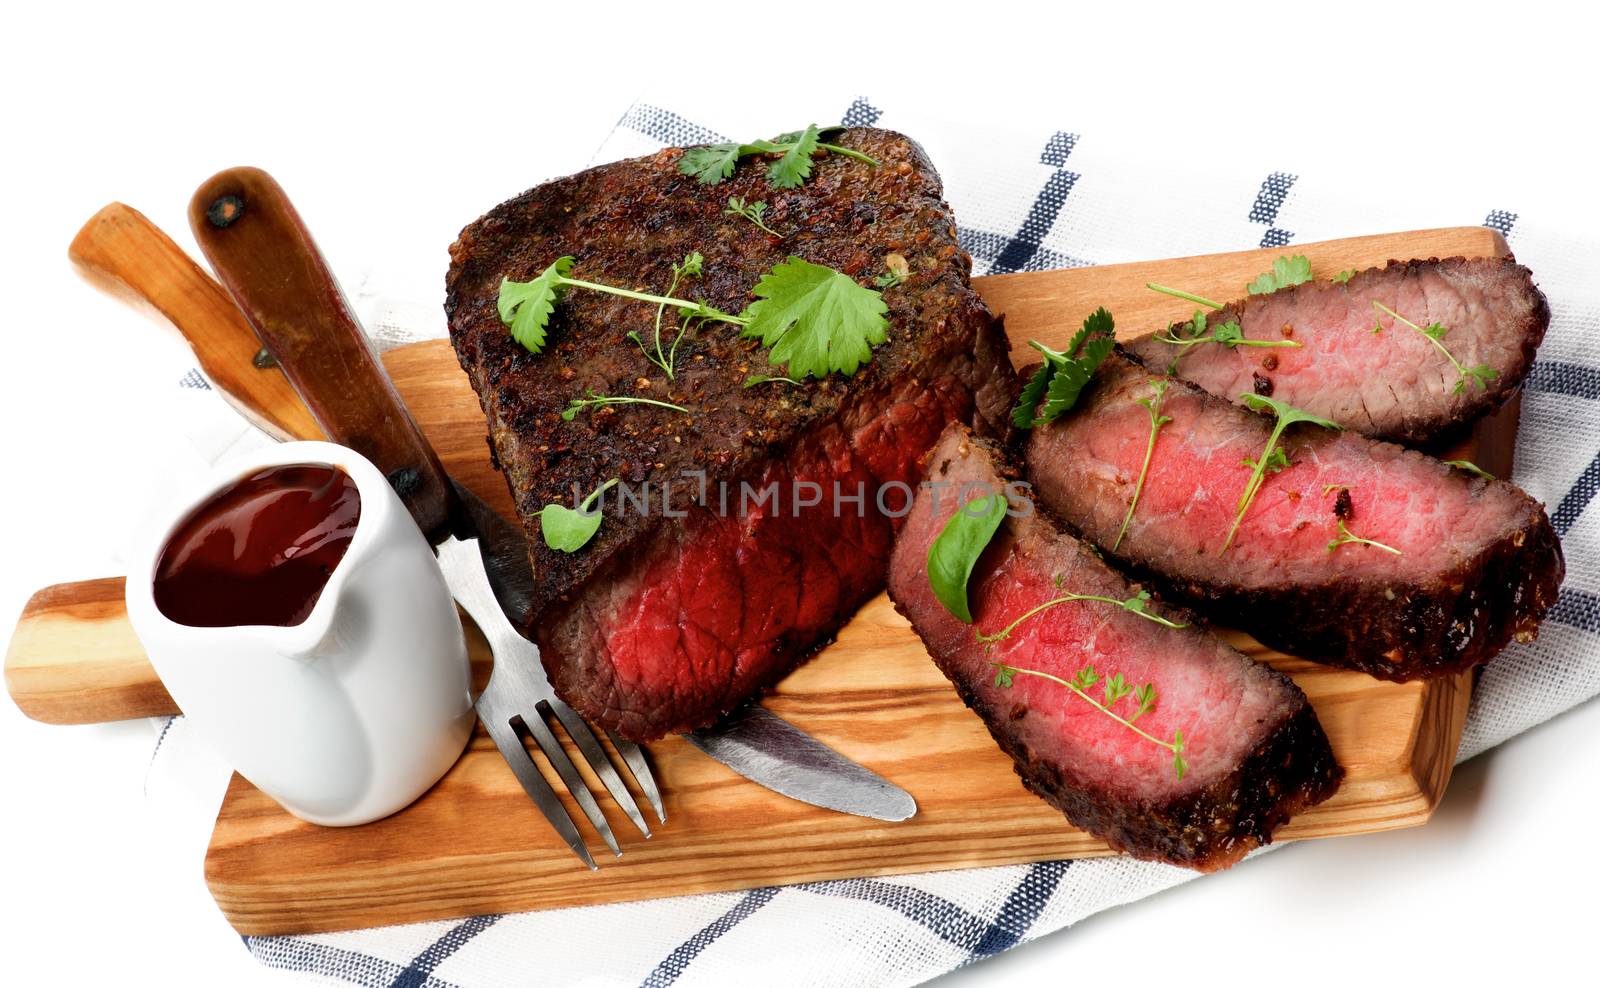 Sliced Delicious Roast Beef Medium Rare on Wooden Cutting Board with Tomato Sauce, Fork and Table Knife closeup on Checkered Napkin